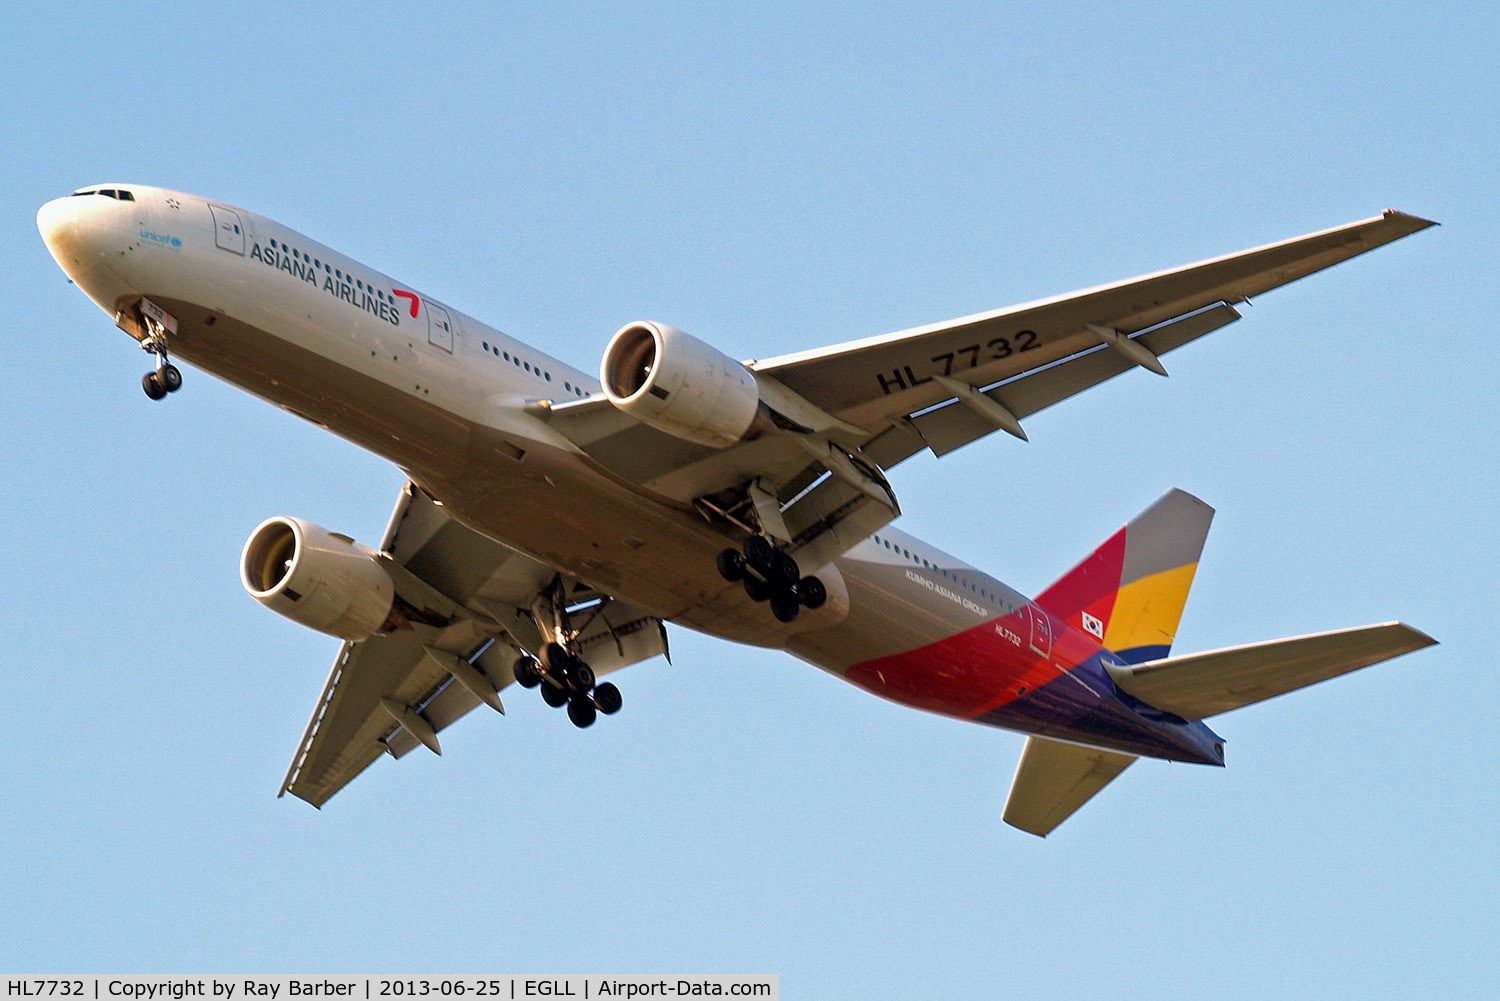 HL7732, 2004 Boeing 777-28E/ER C/N 29174, Boeing 777-28EER [29174] (Asiana Airlines) Home~G 25/06/2013. On approach 27R.